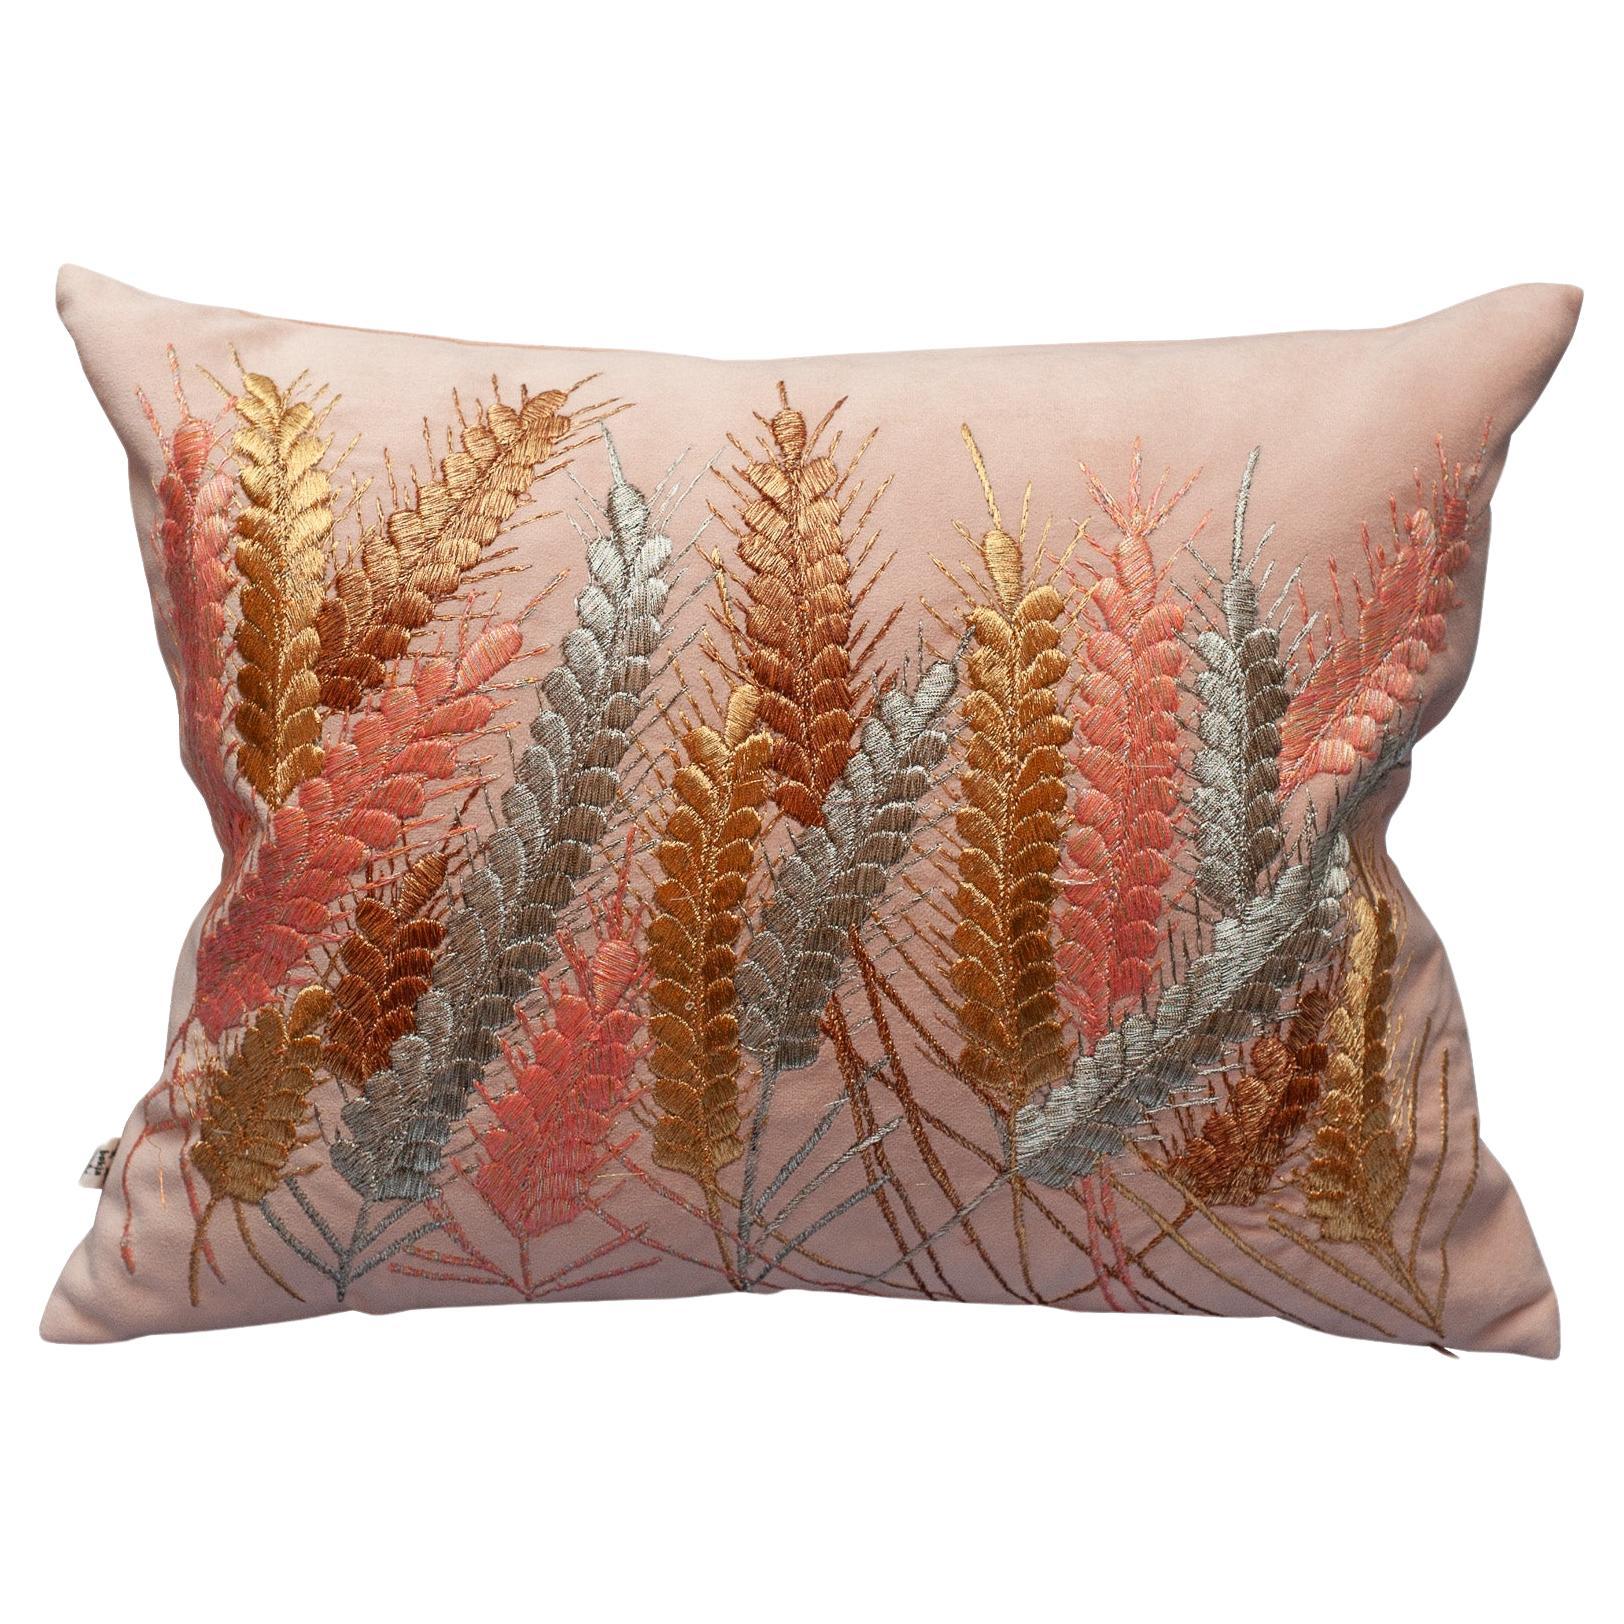 Contemporary Embroidered Pillow on Soft Pink Ultrasuede with Metallic Wheat For Sale